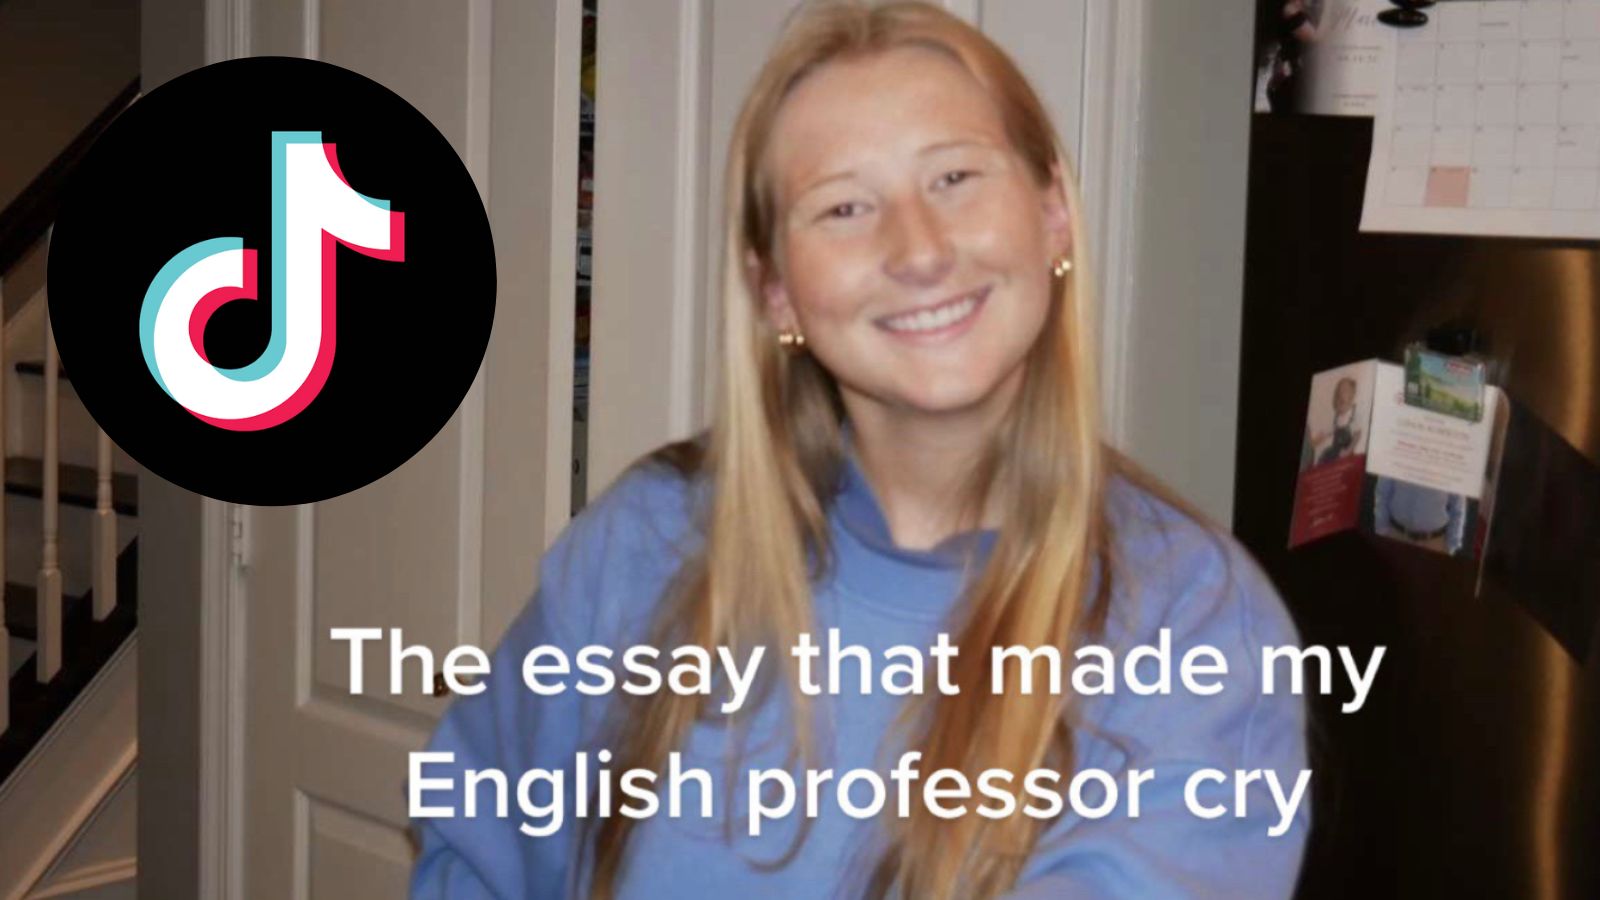 what is the essay that made the teacher cry